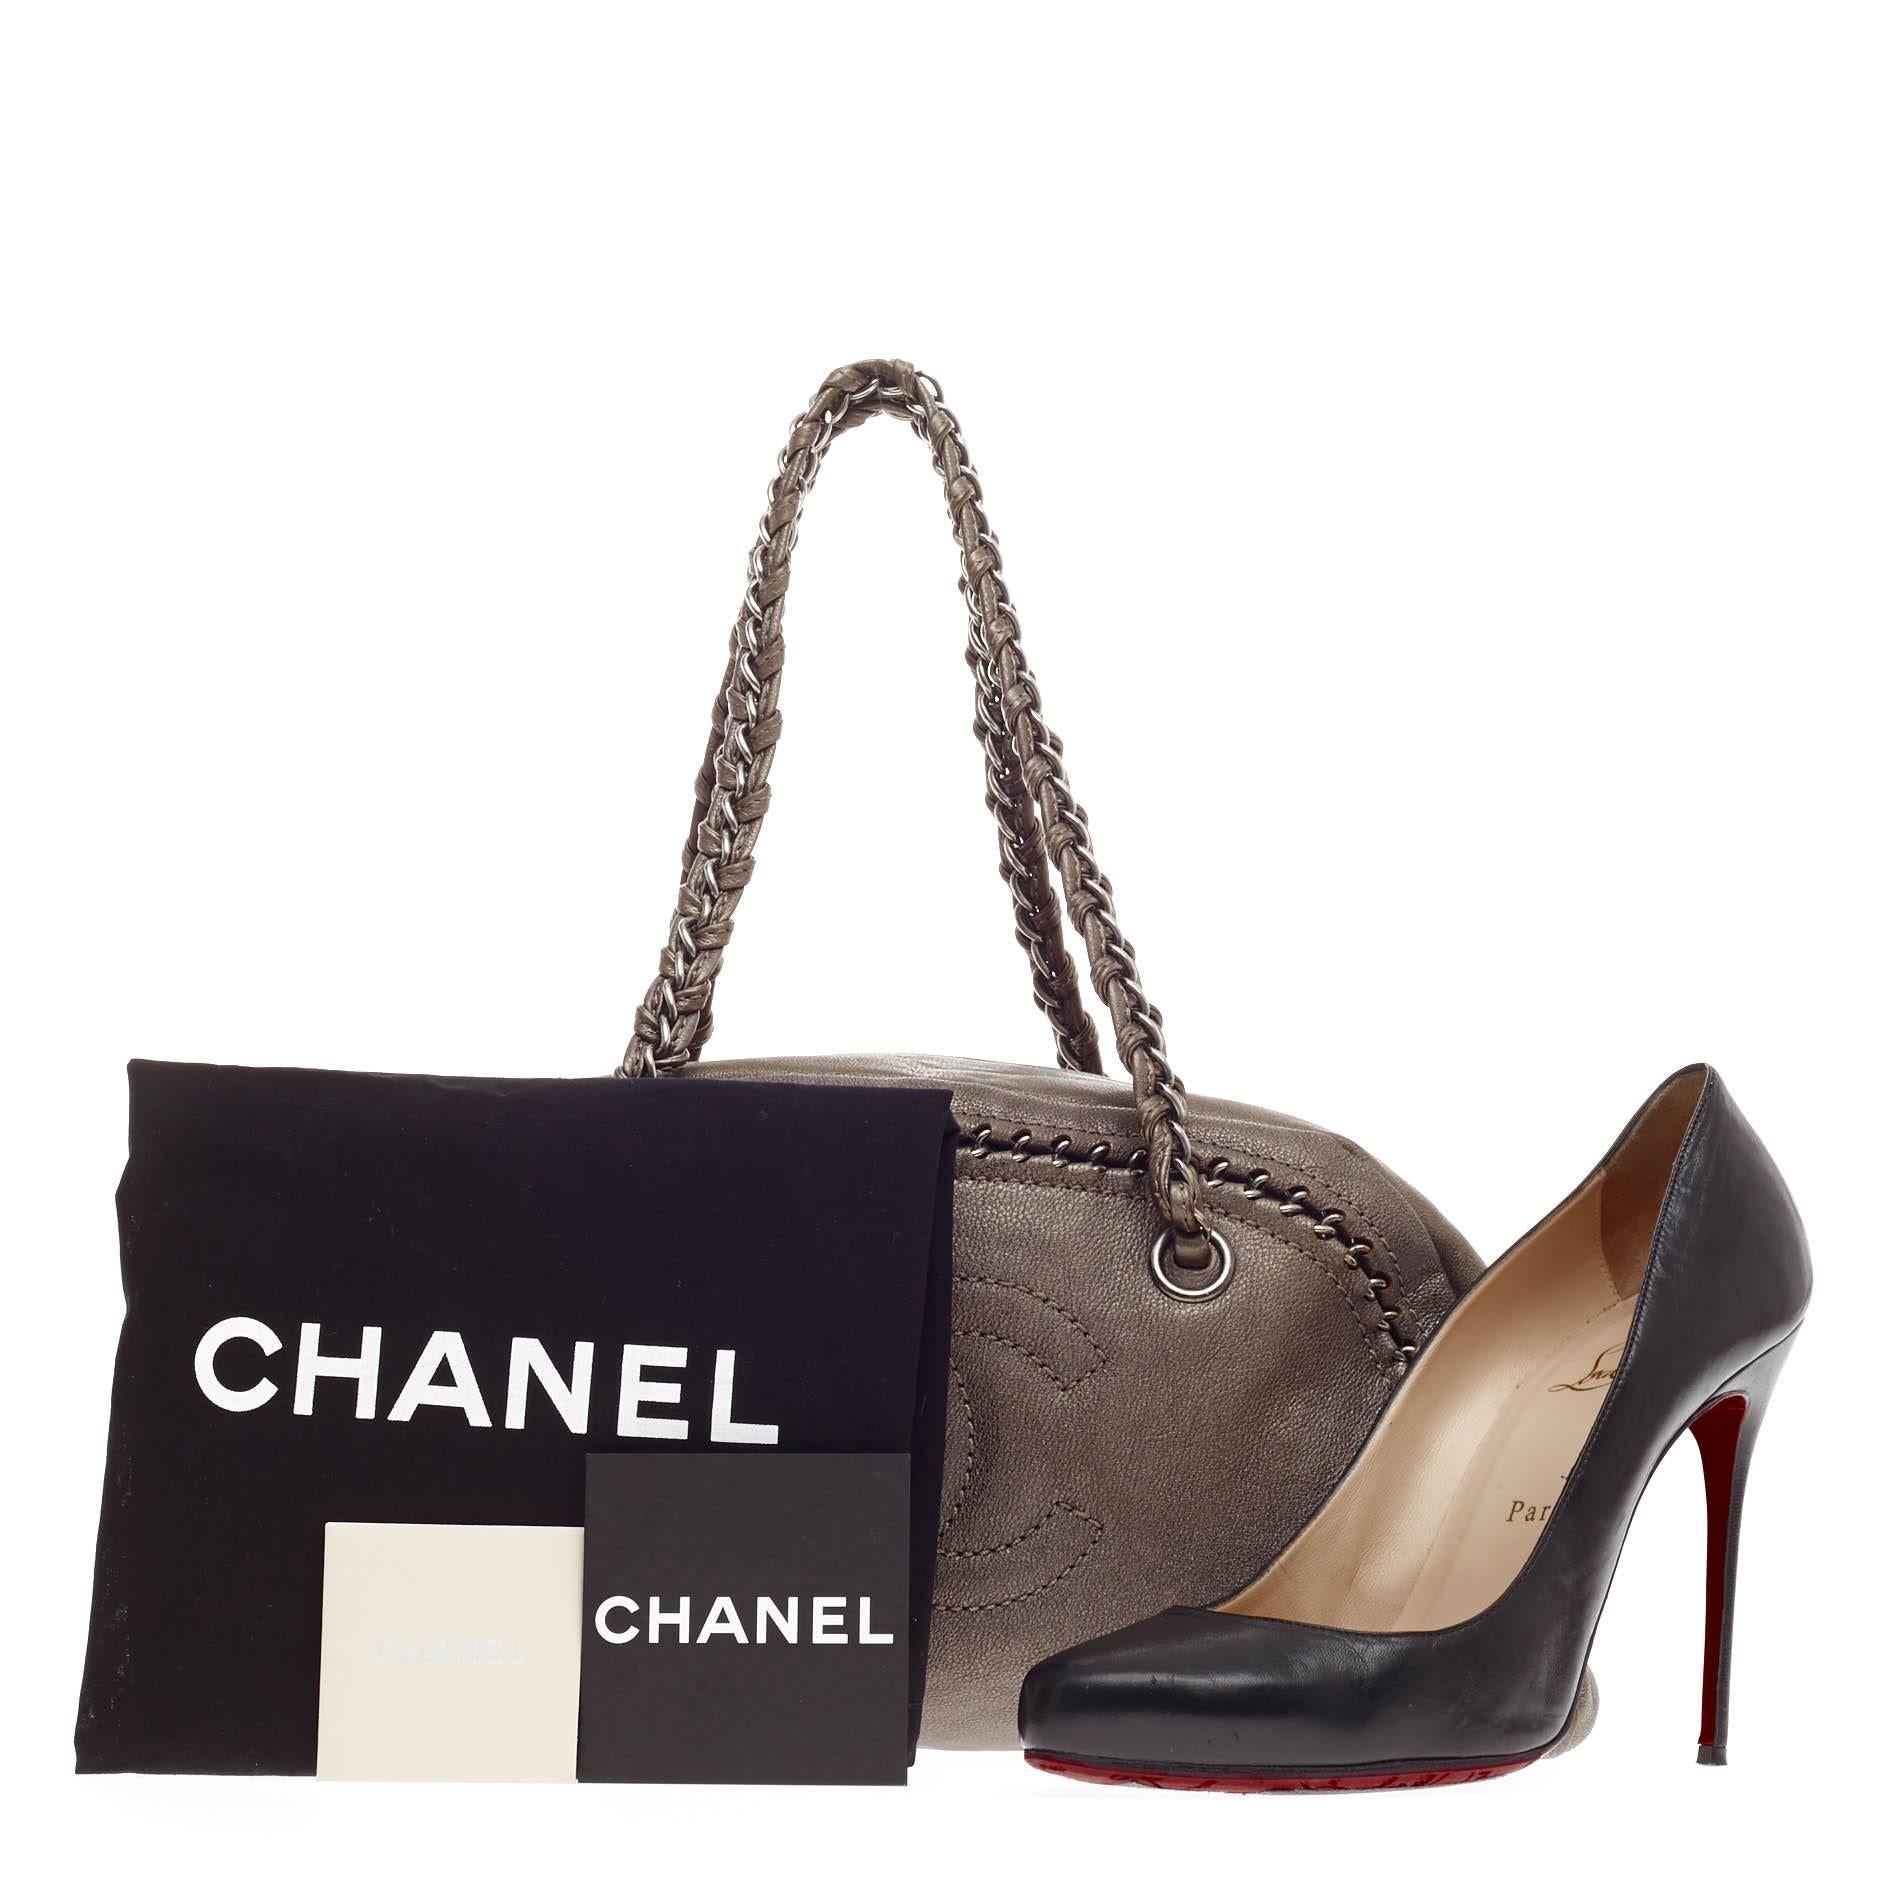 This authentic Chanel Luxe Ligne Bowler Leather Medium is perfect for an on-the-go fashionista. Constructed from metallic taupe-gray leather, this dome-shaped shoulder bag features braided woven leather silver chain straps, stitched chain edges with